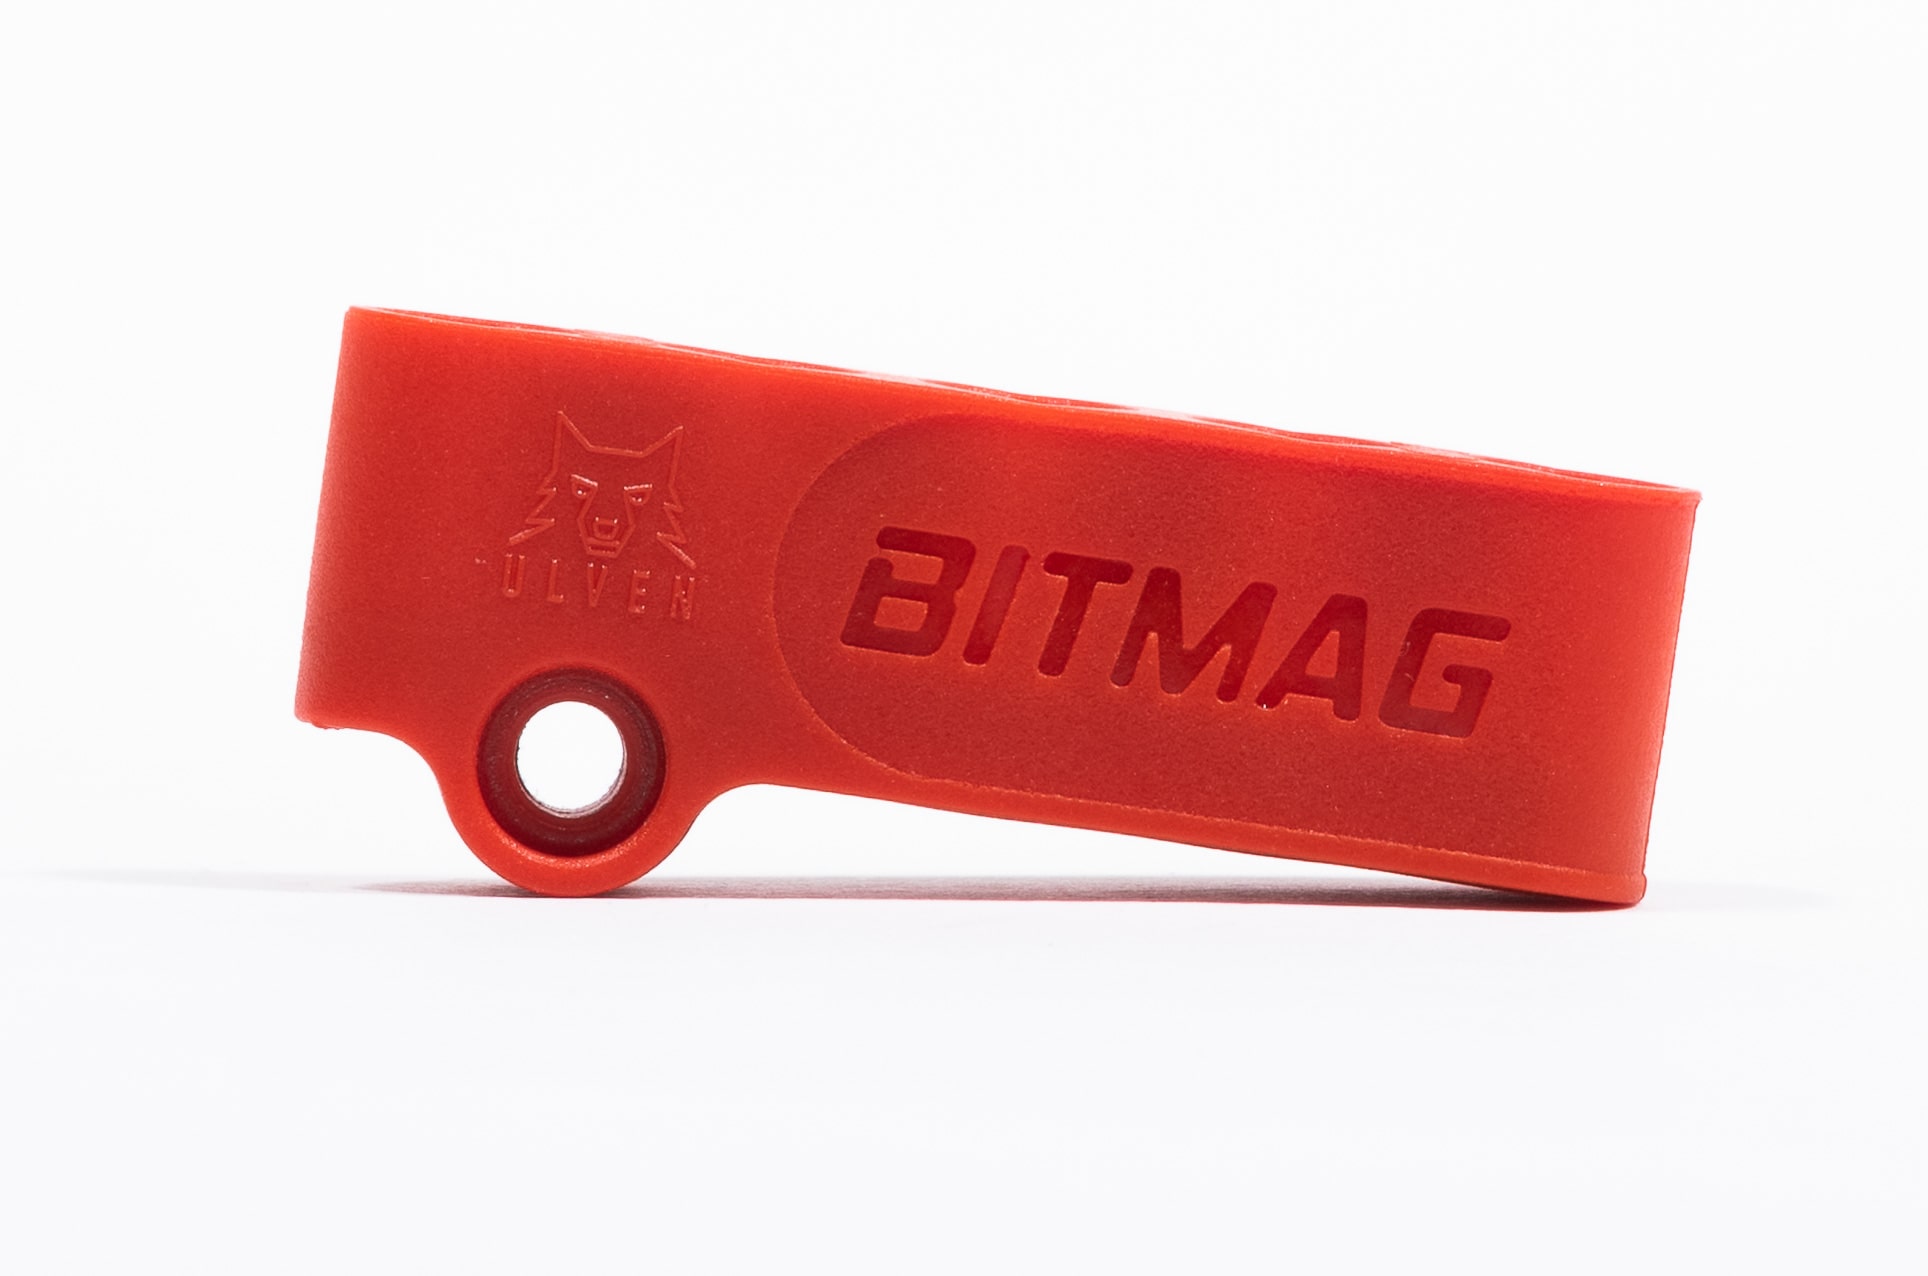 BitMag Always to Hand for Fast swapping Magnetic Bit Holder Plastic Composite Body or Aluminum Red for Drills and Drivers Holds 1/4 hex bits Store Your bits on Your Power Tool